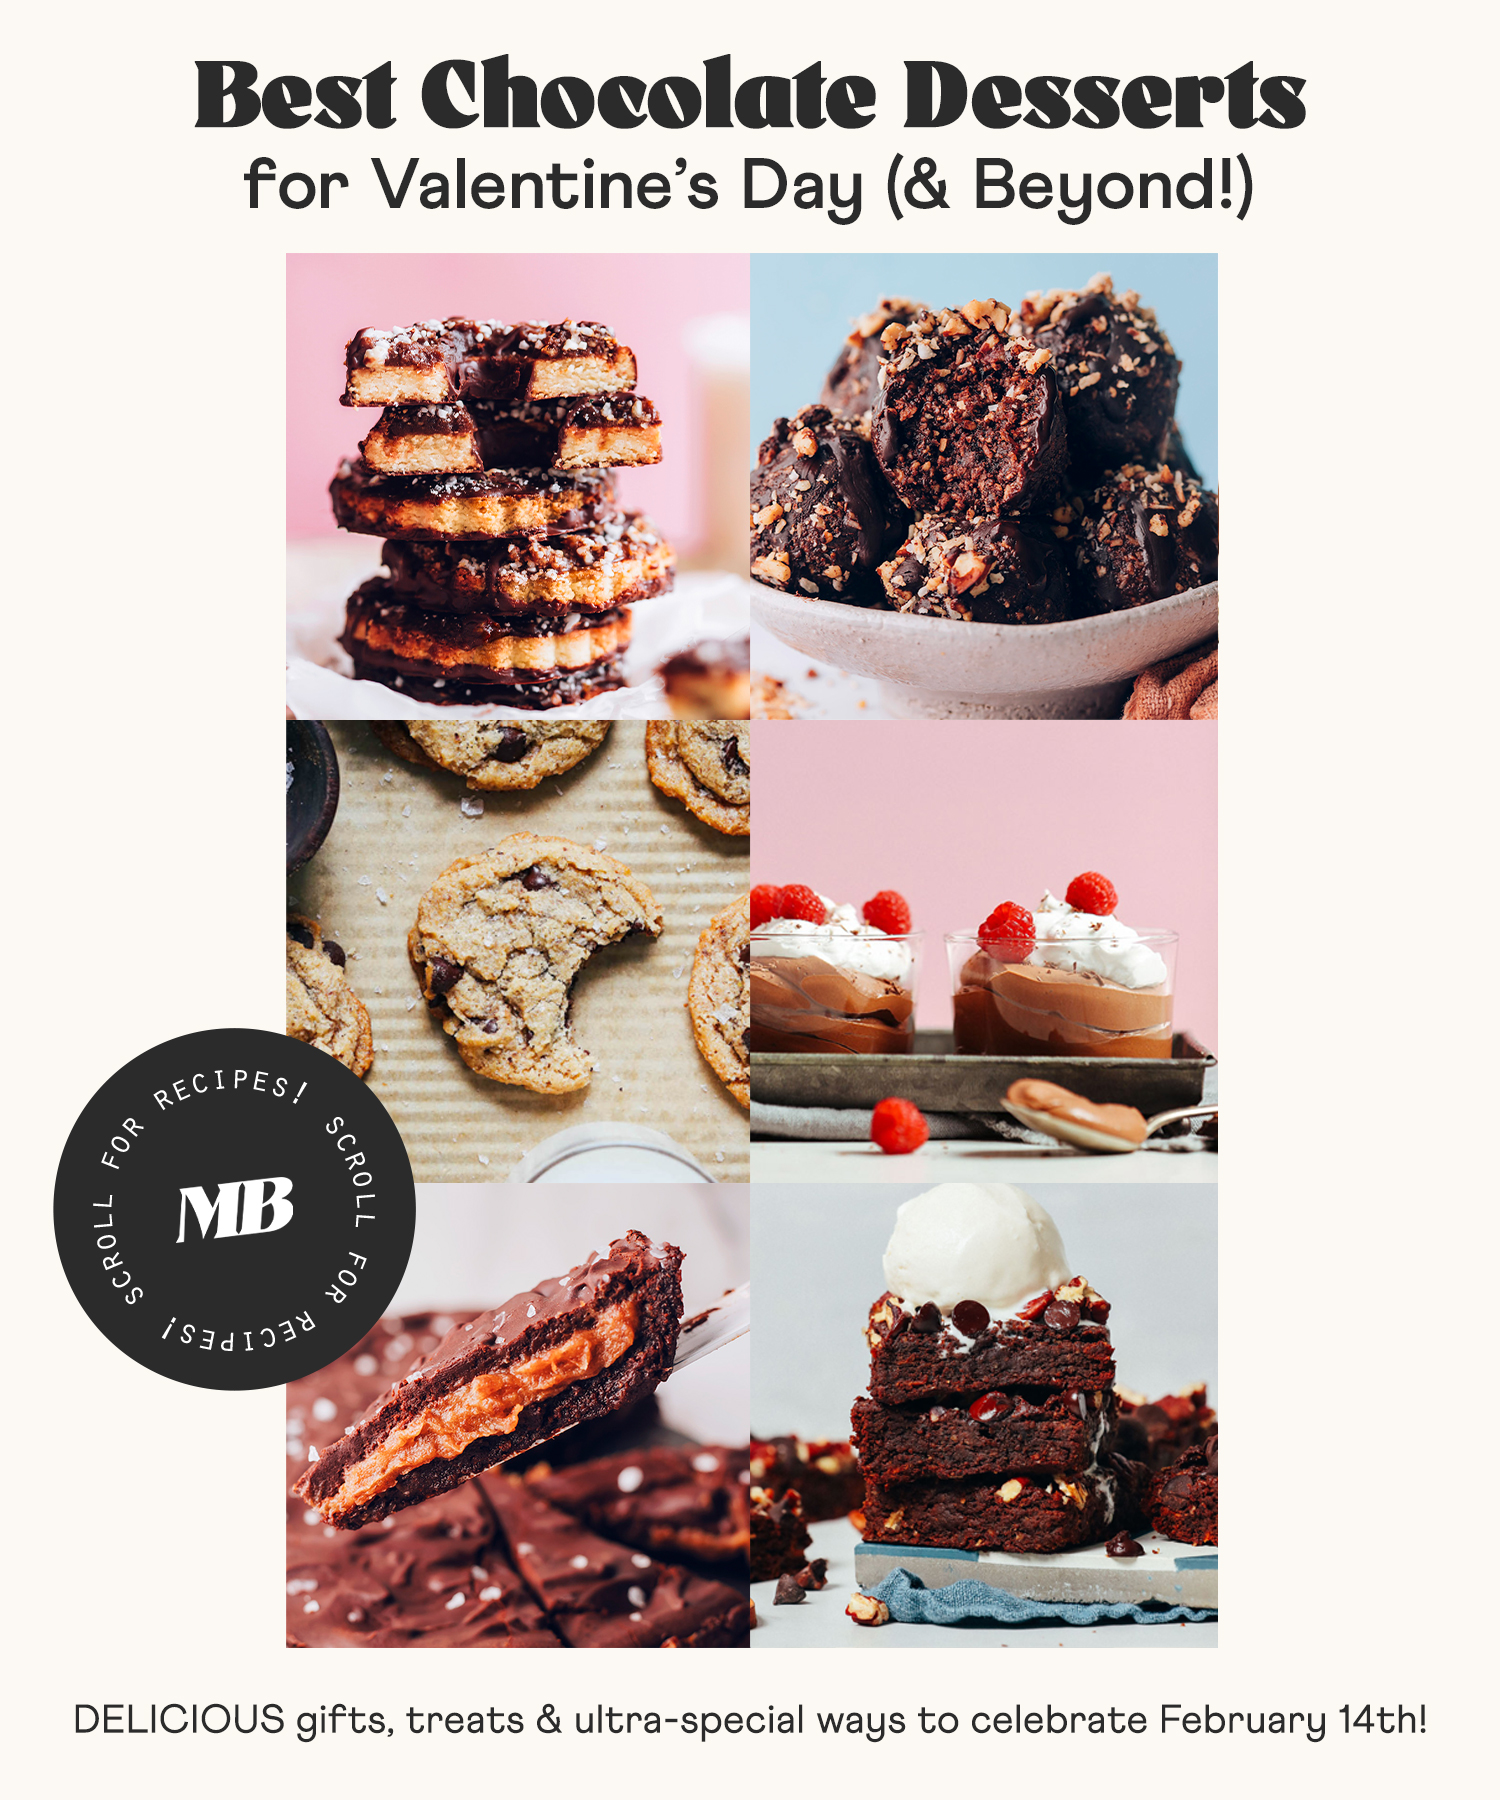 Image of chocolate desserts for Valentine's Day